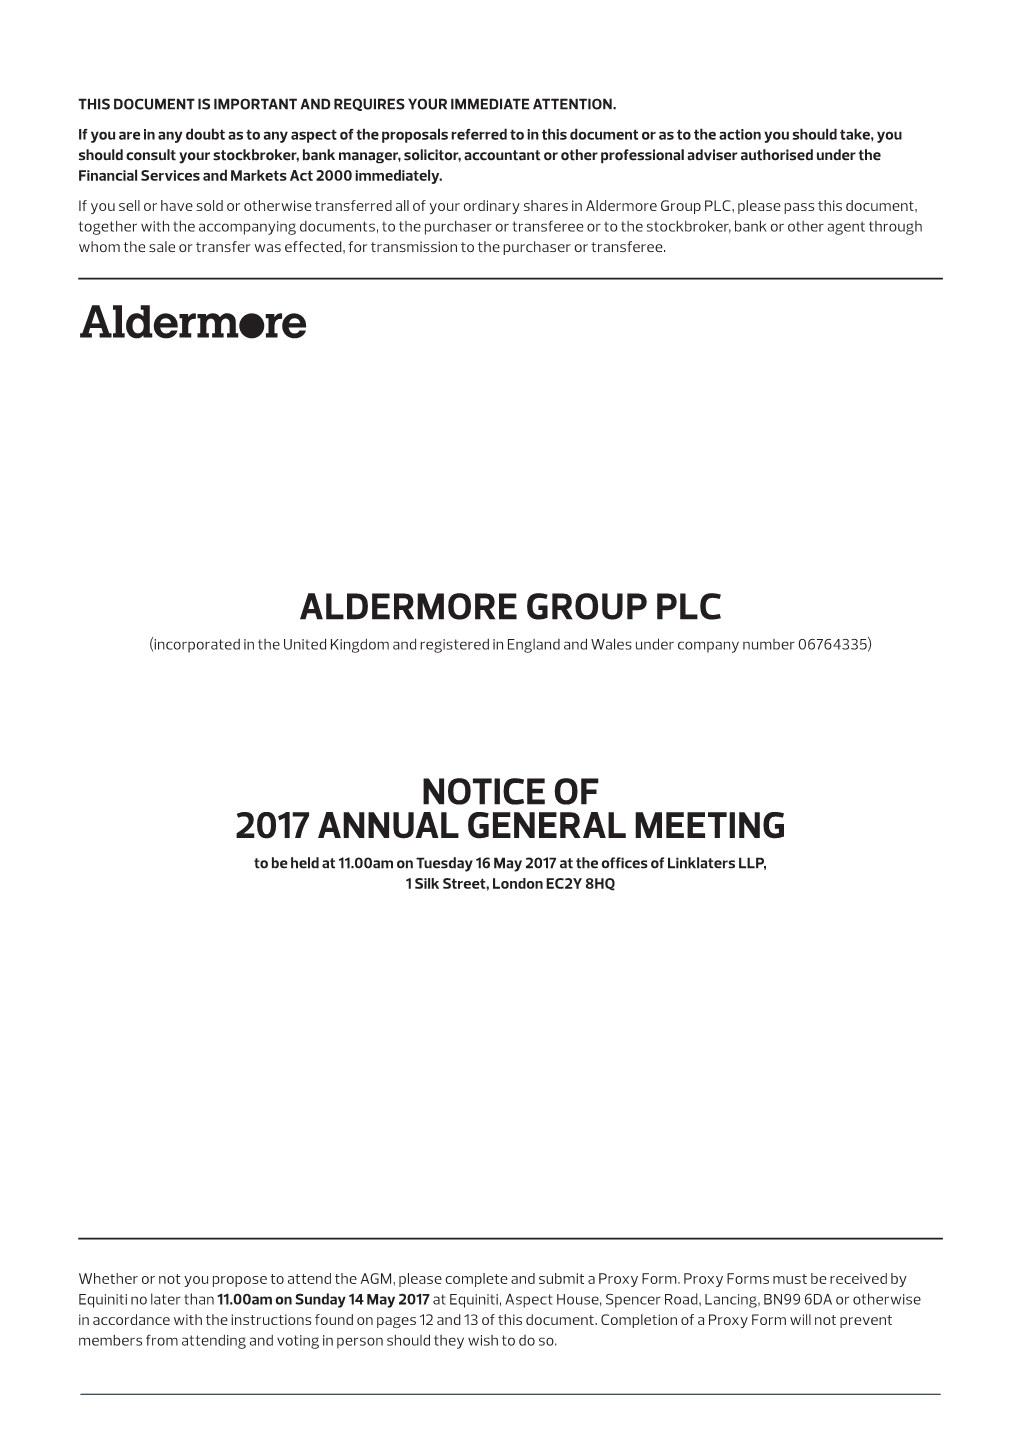 Aldermore Group PLC Notice of 2017 Annual General Meeting